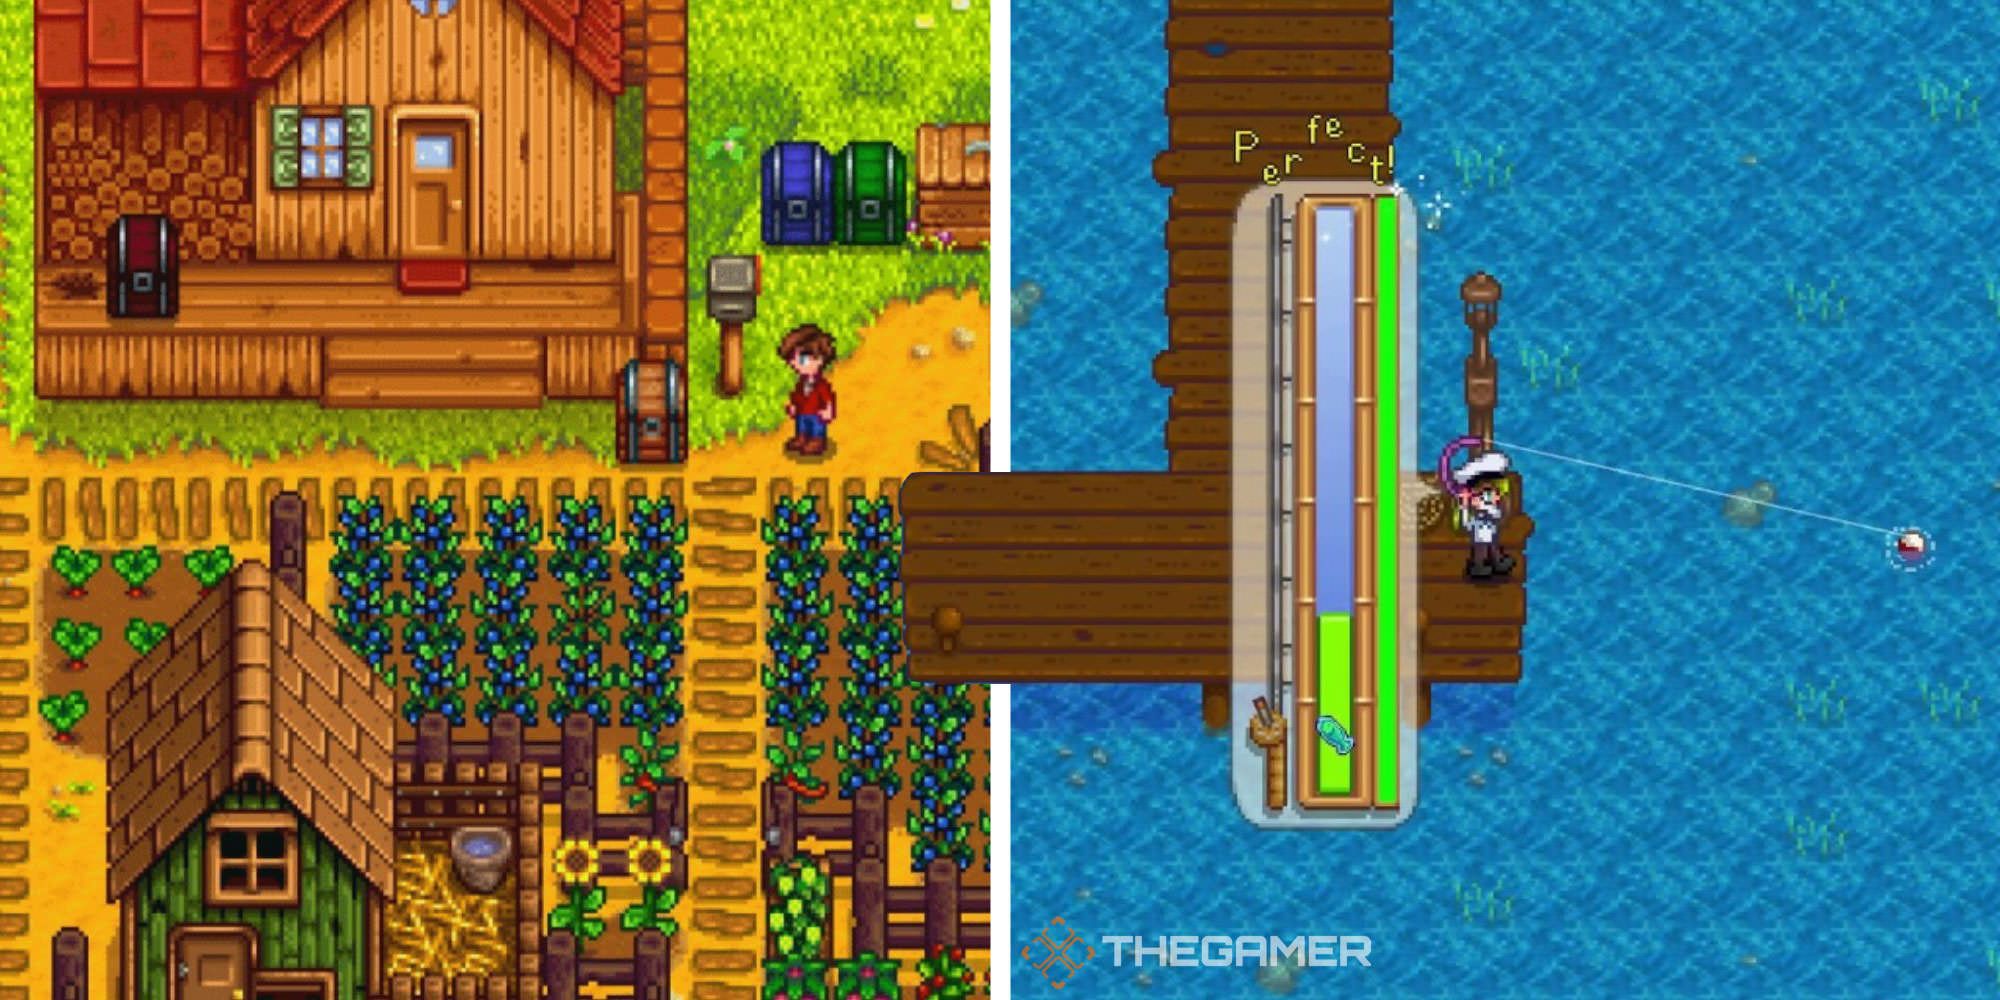 How To Make Money In Stardew Valley